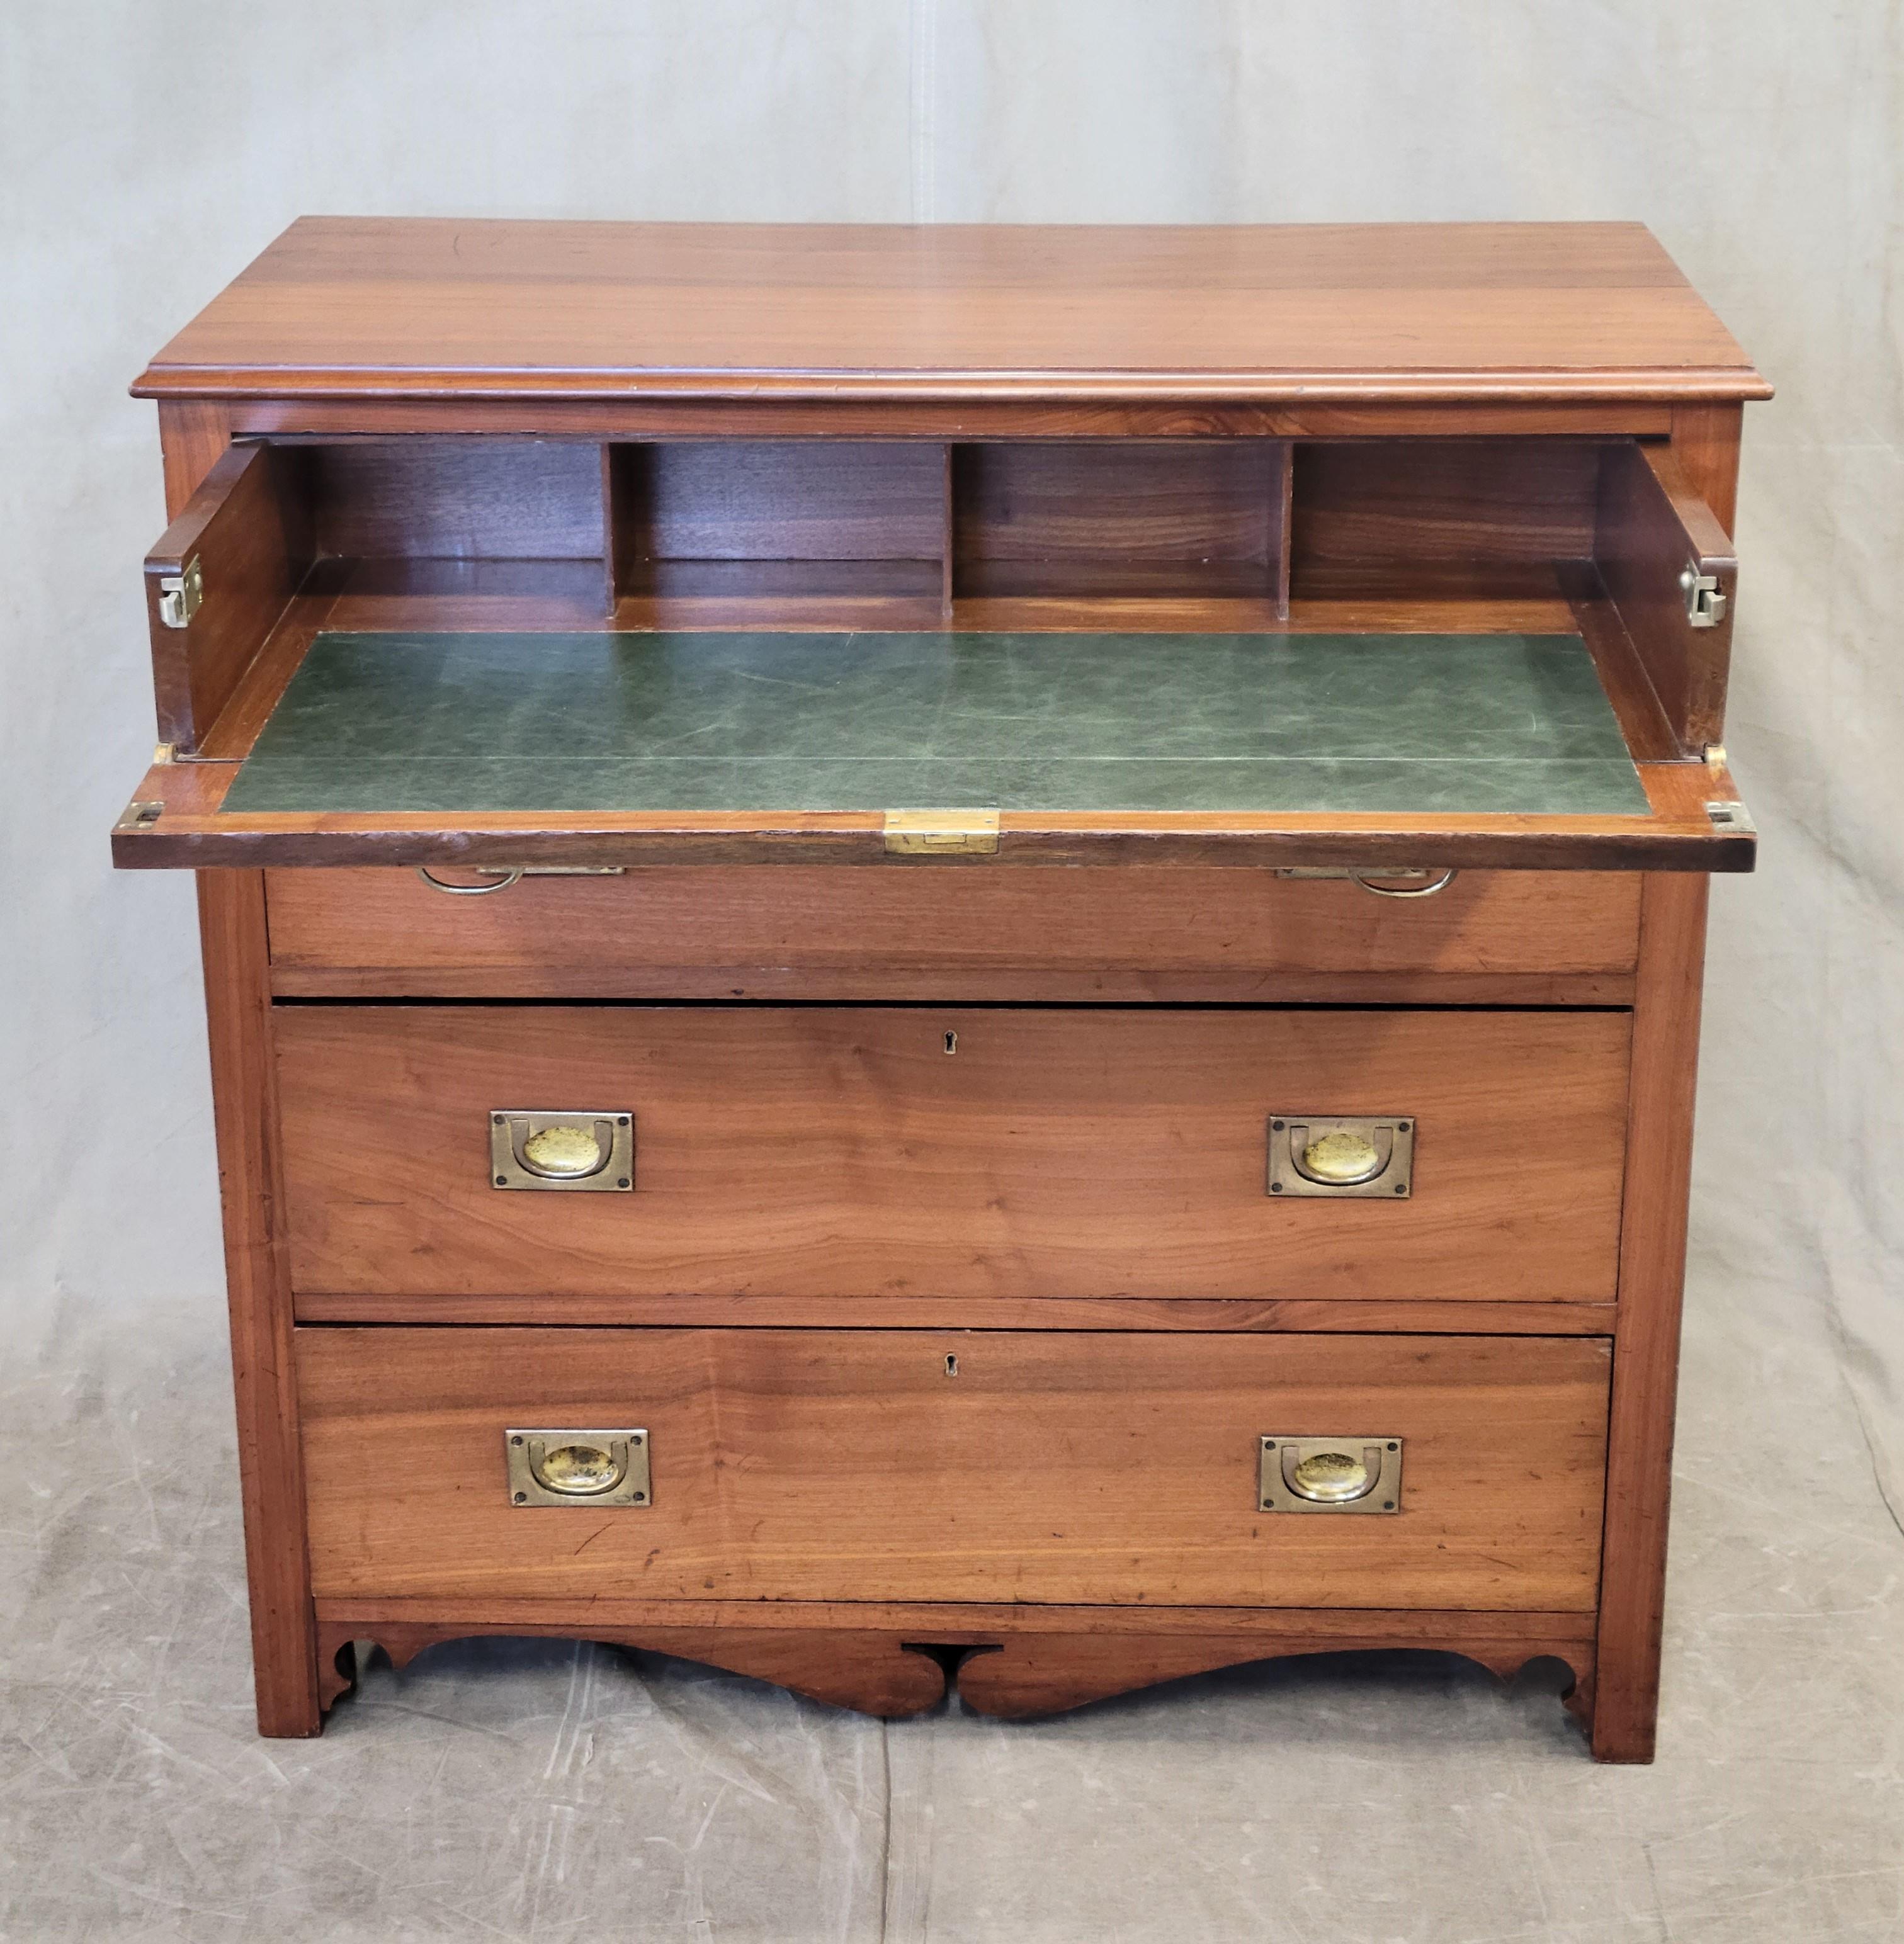 British Antique Scottish or English Campaign Butler's Desk Chest of Drawers For Sale